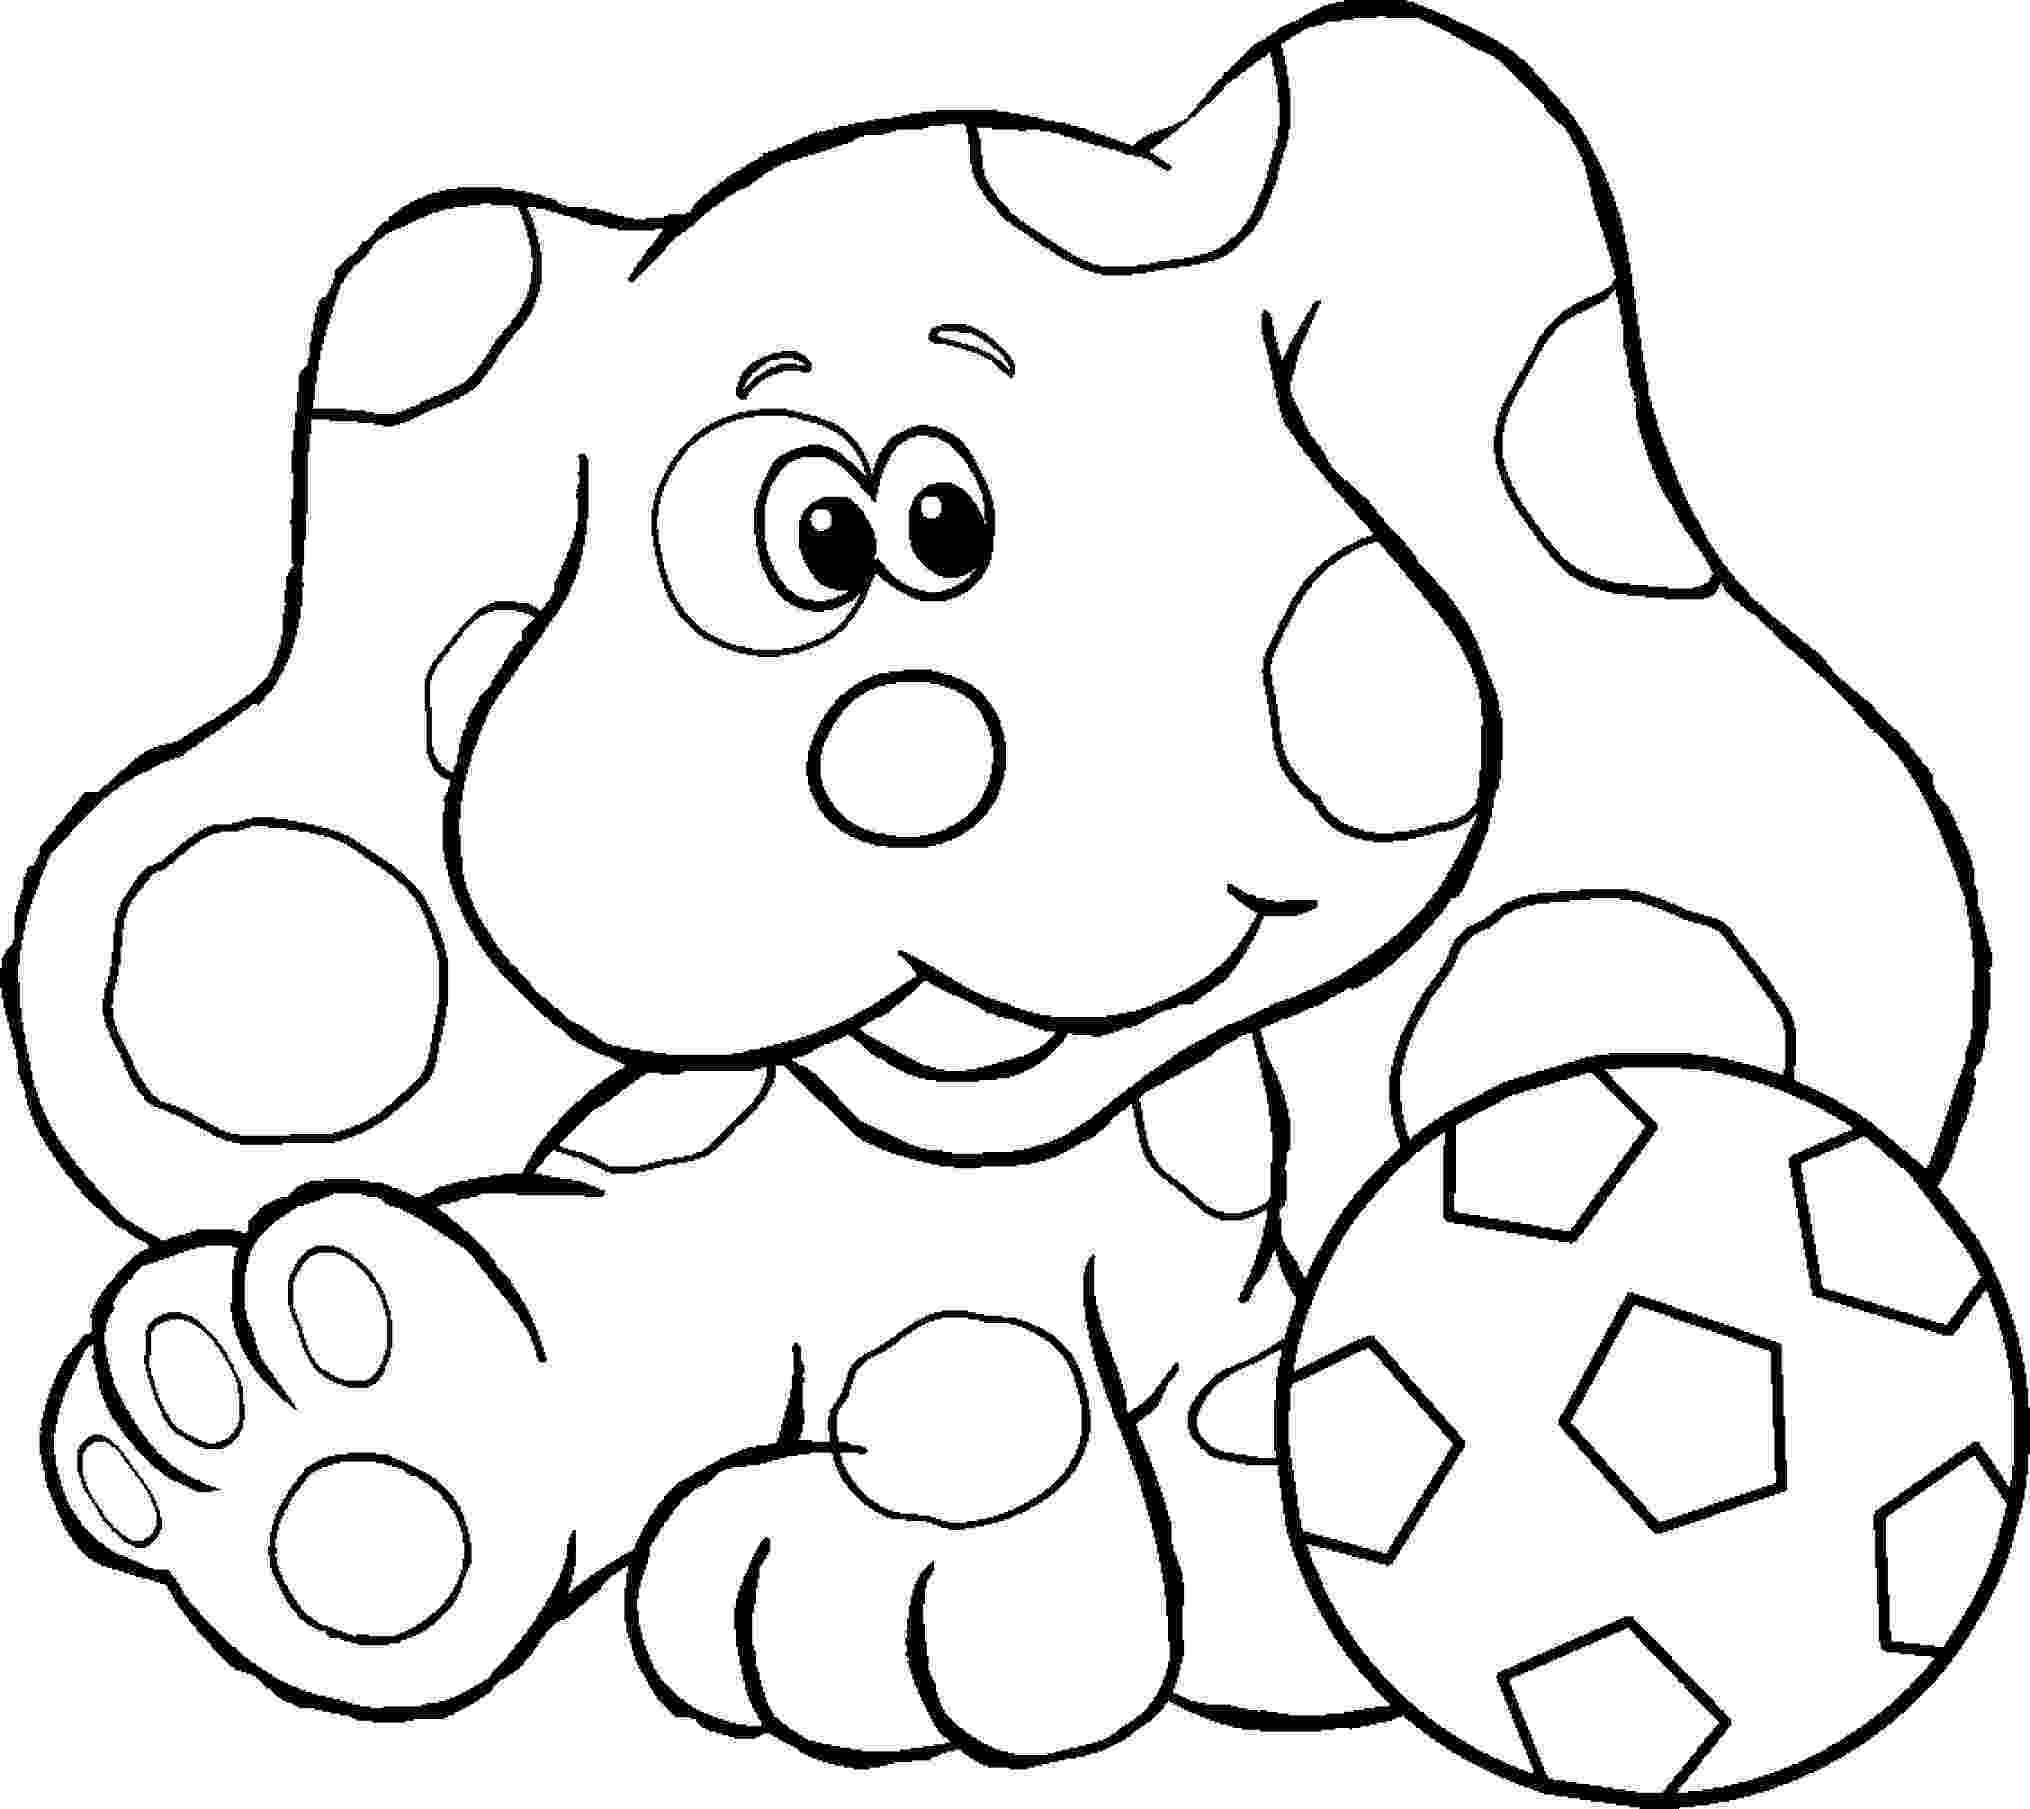 blues clues coloring pages free printable blues clues coloring pages for kids pages clues blues coloring 